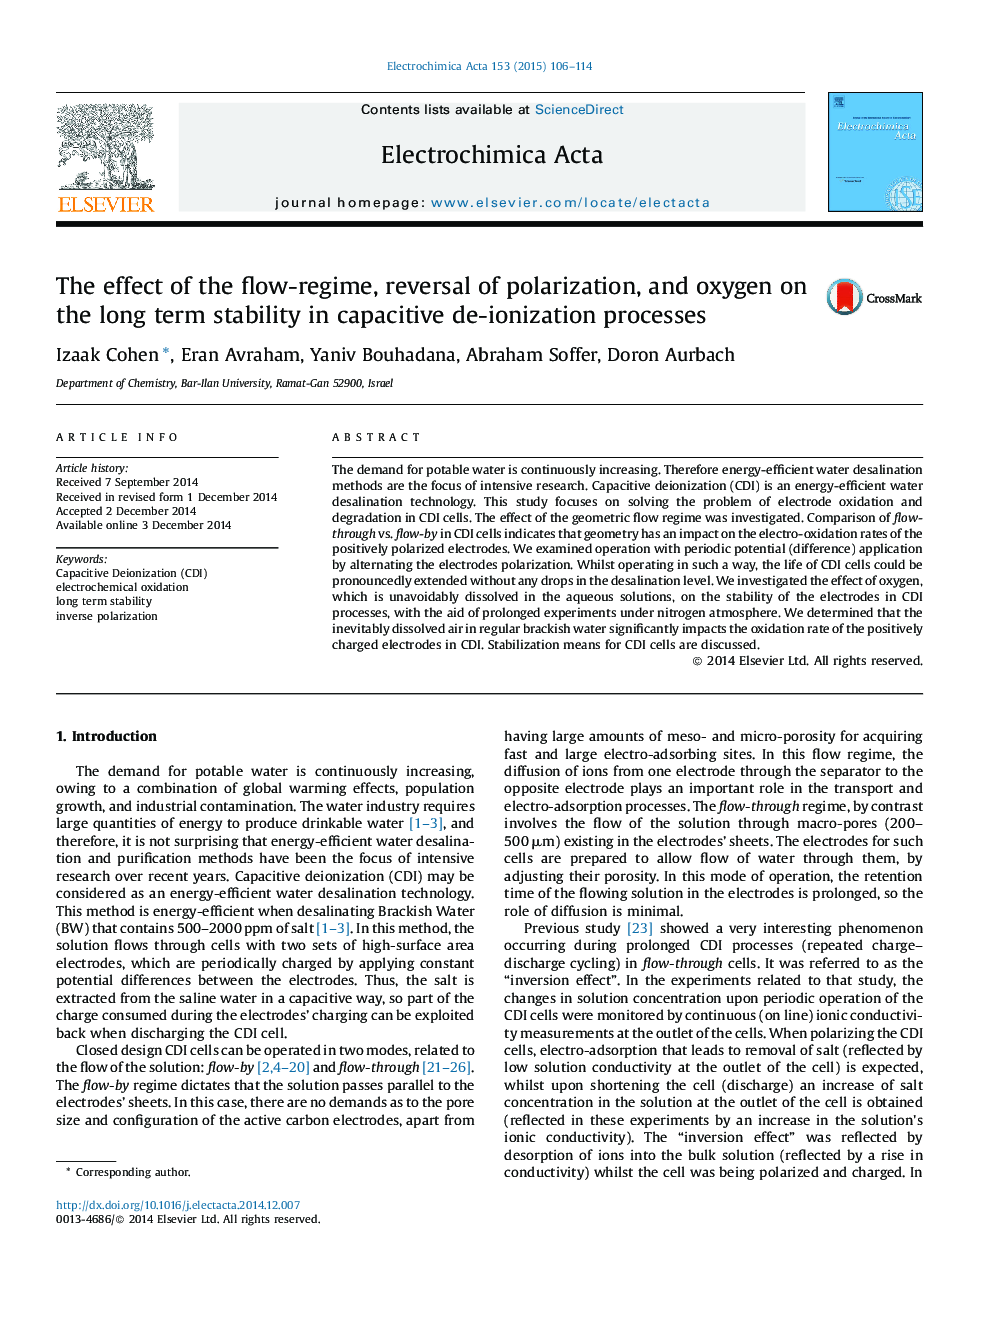 The effect of the flow-regime, reversal of polarization, and oxygen on the long term stability in capacitive de-ionization processes